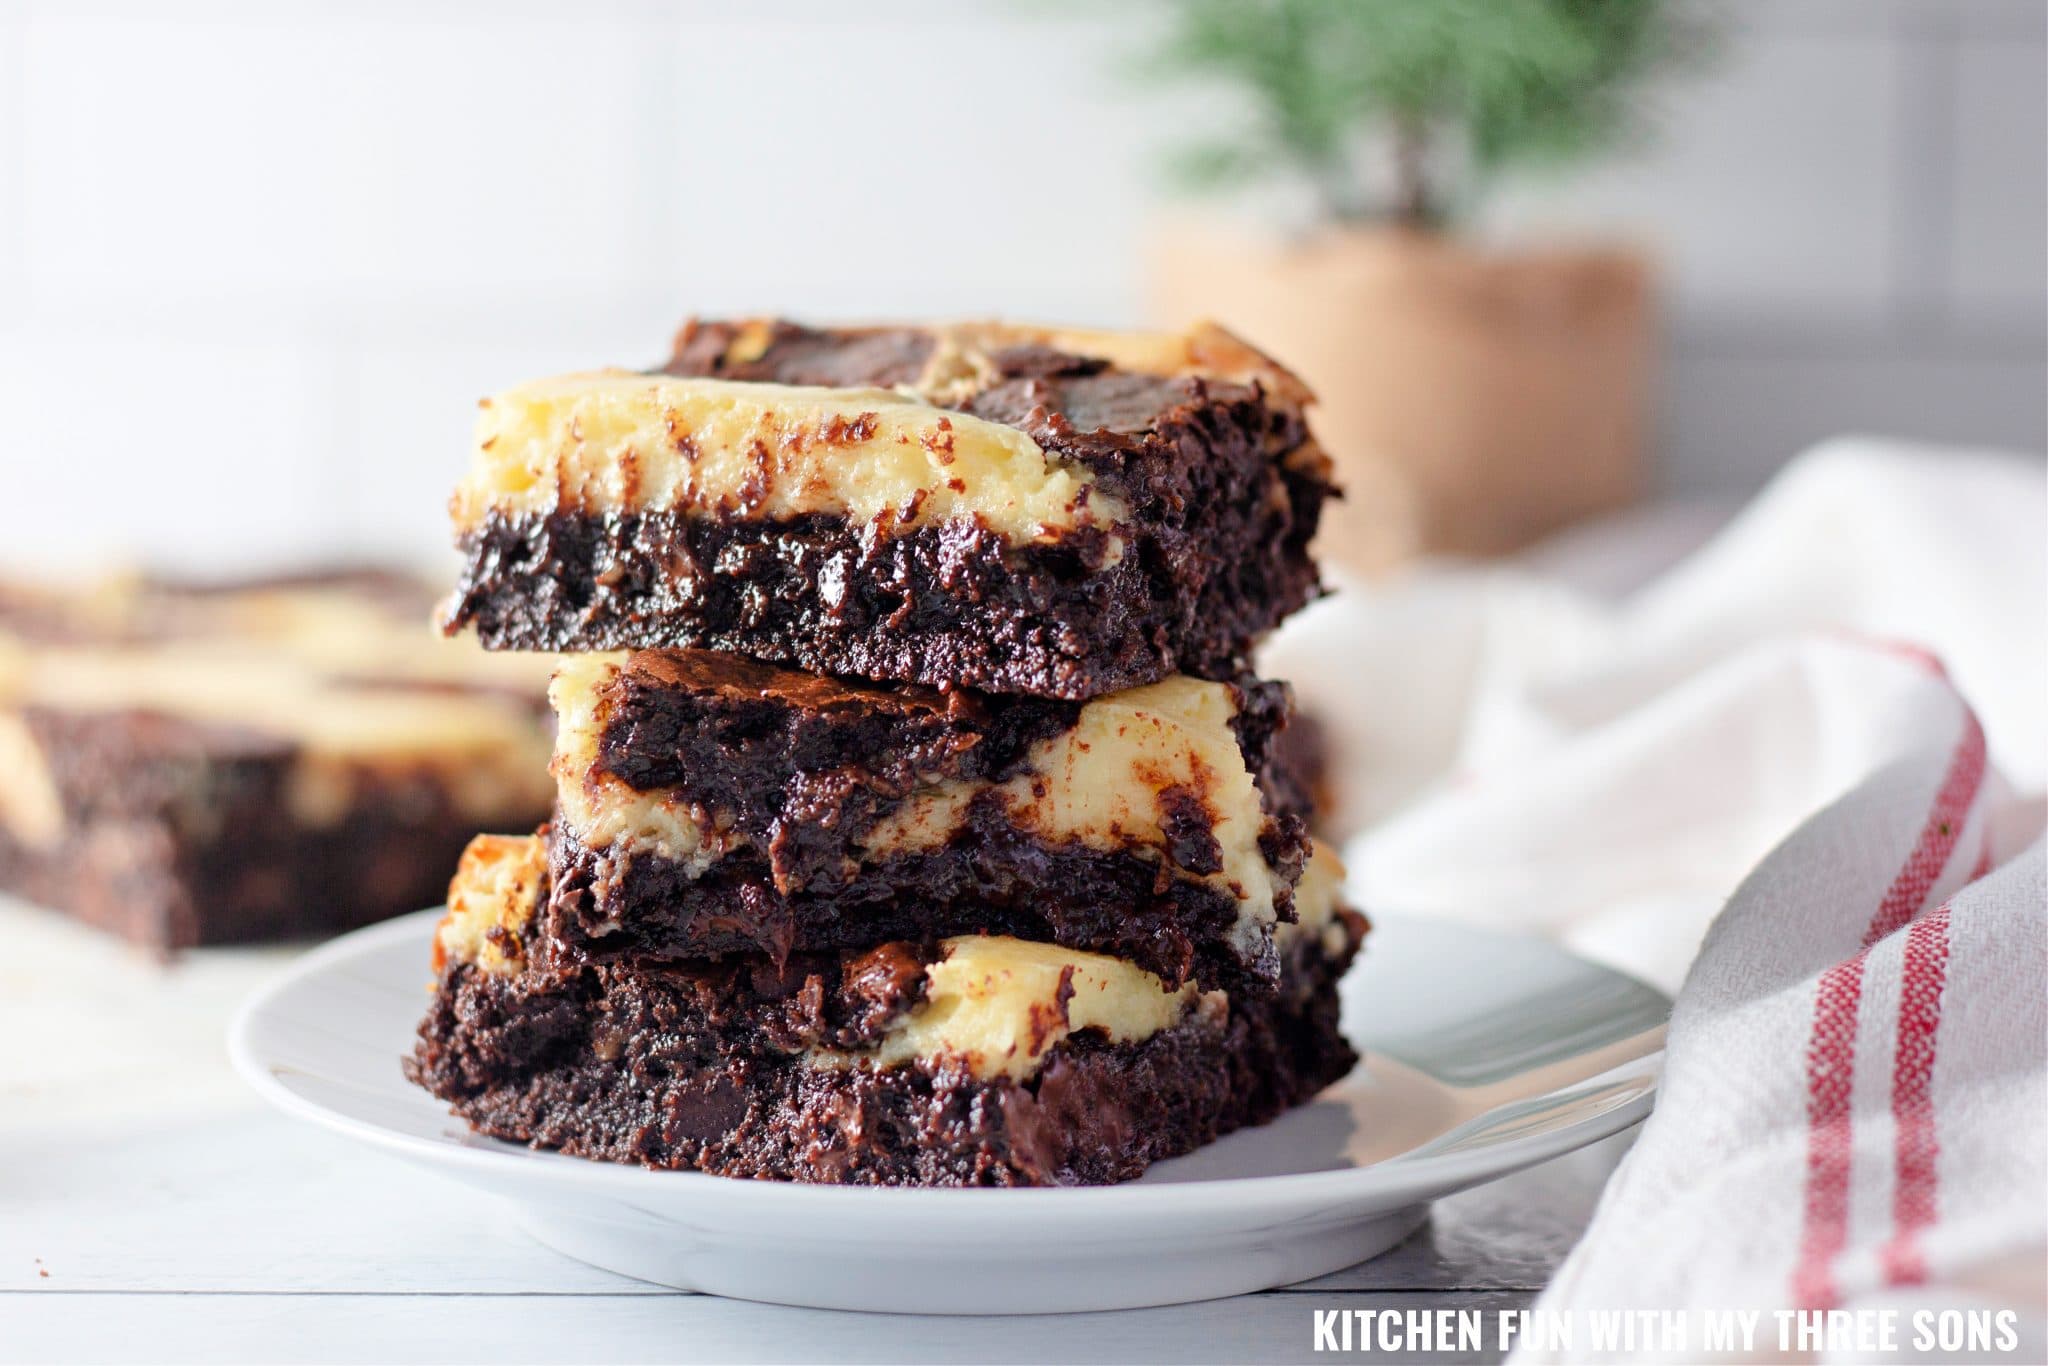 Three cheesecake brownies stacked on a white plate.